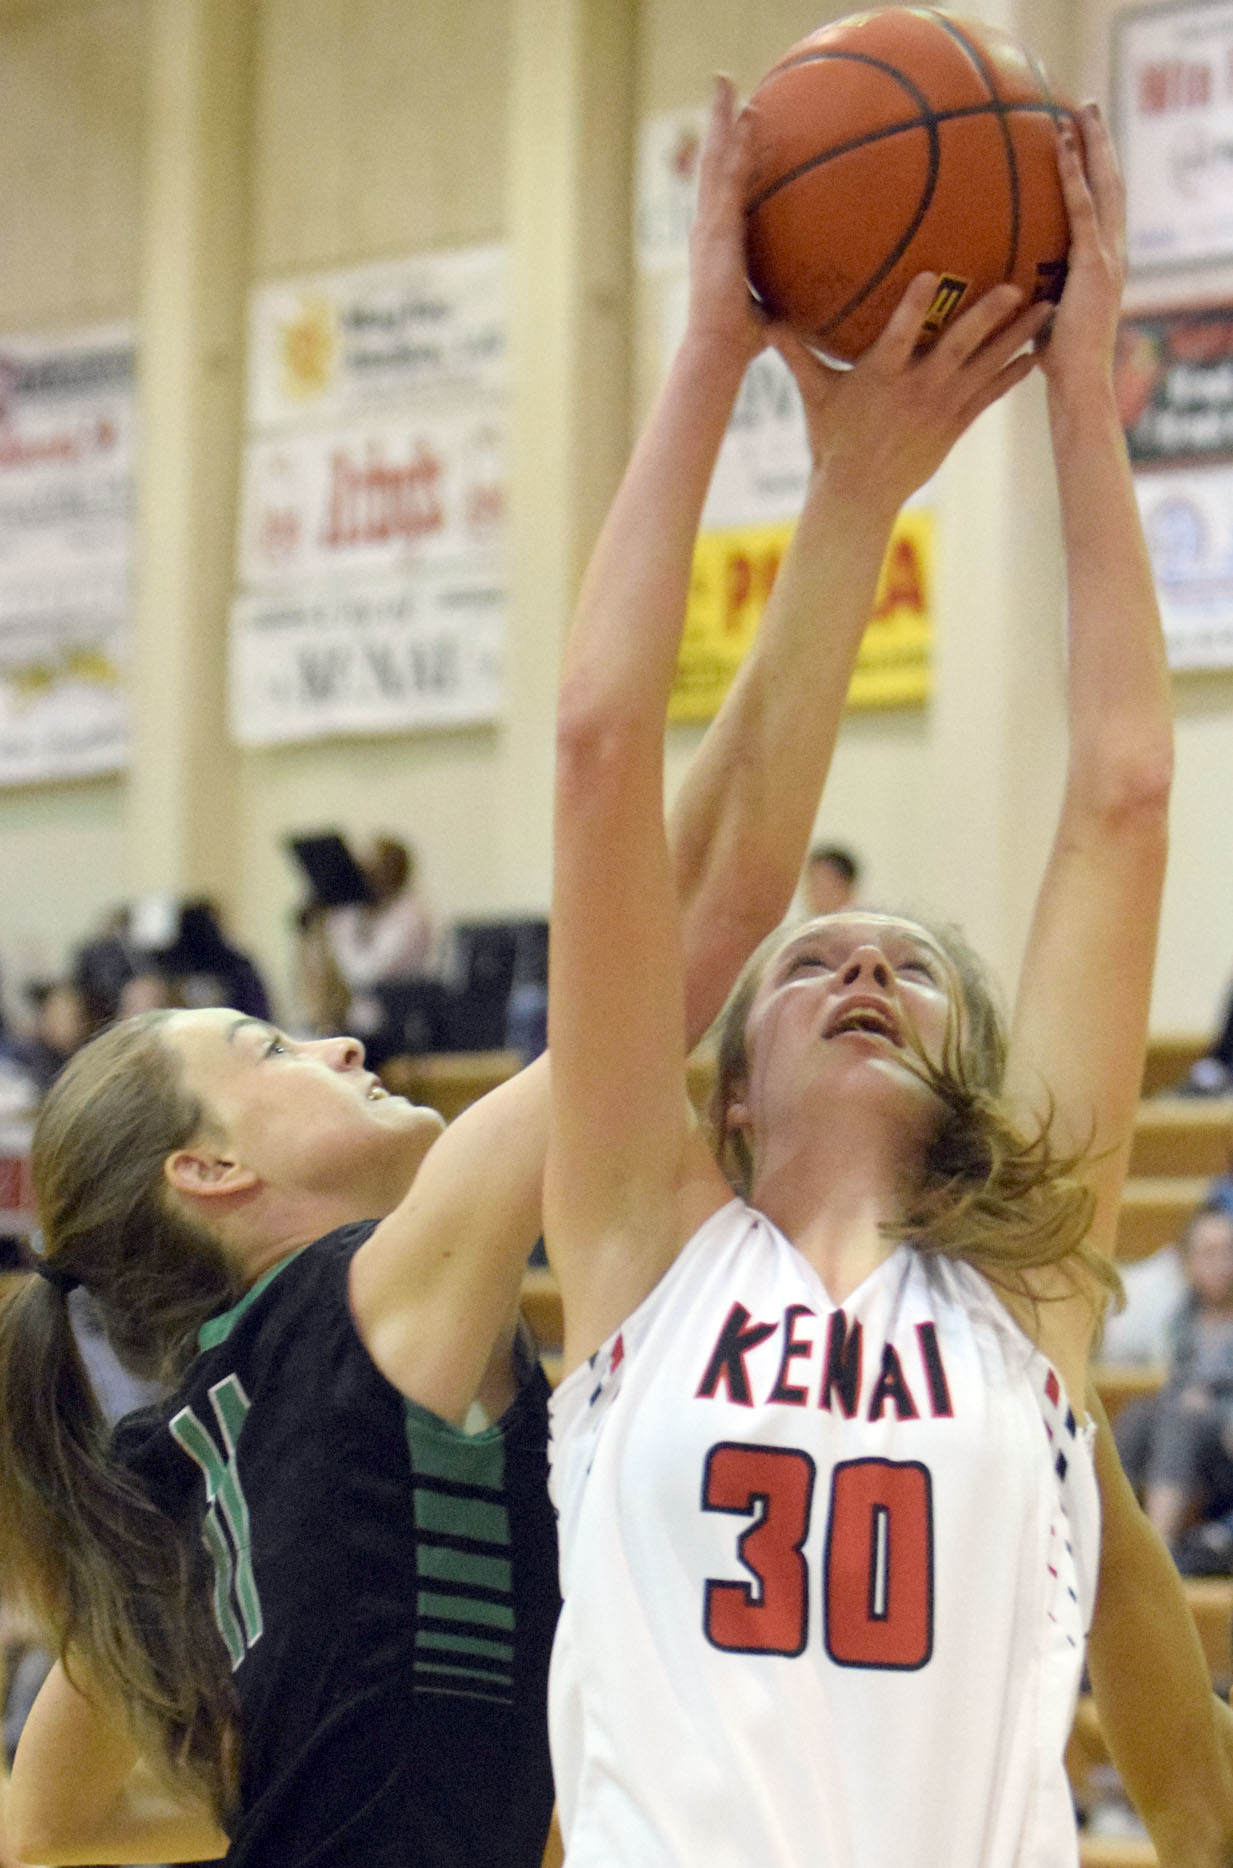 Colony's Ella Smith keeps her eye on the ball as a host of hands battle for possession Thursday, Jan. 26, 2017, at Kenai Central High School. (Photo by Jeff Helminiak/Peninsula Clarion)